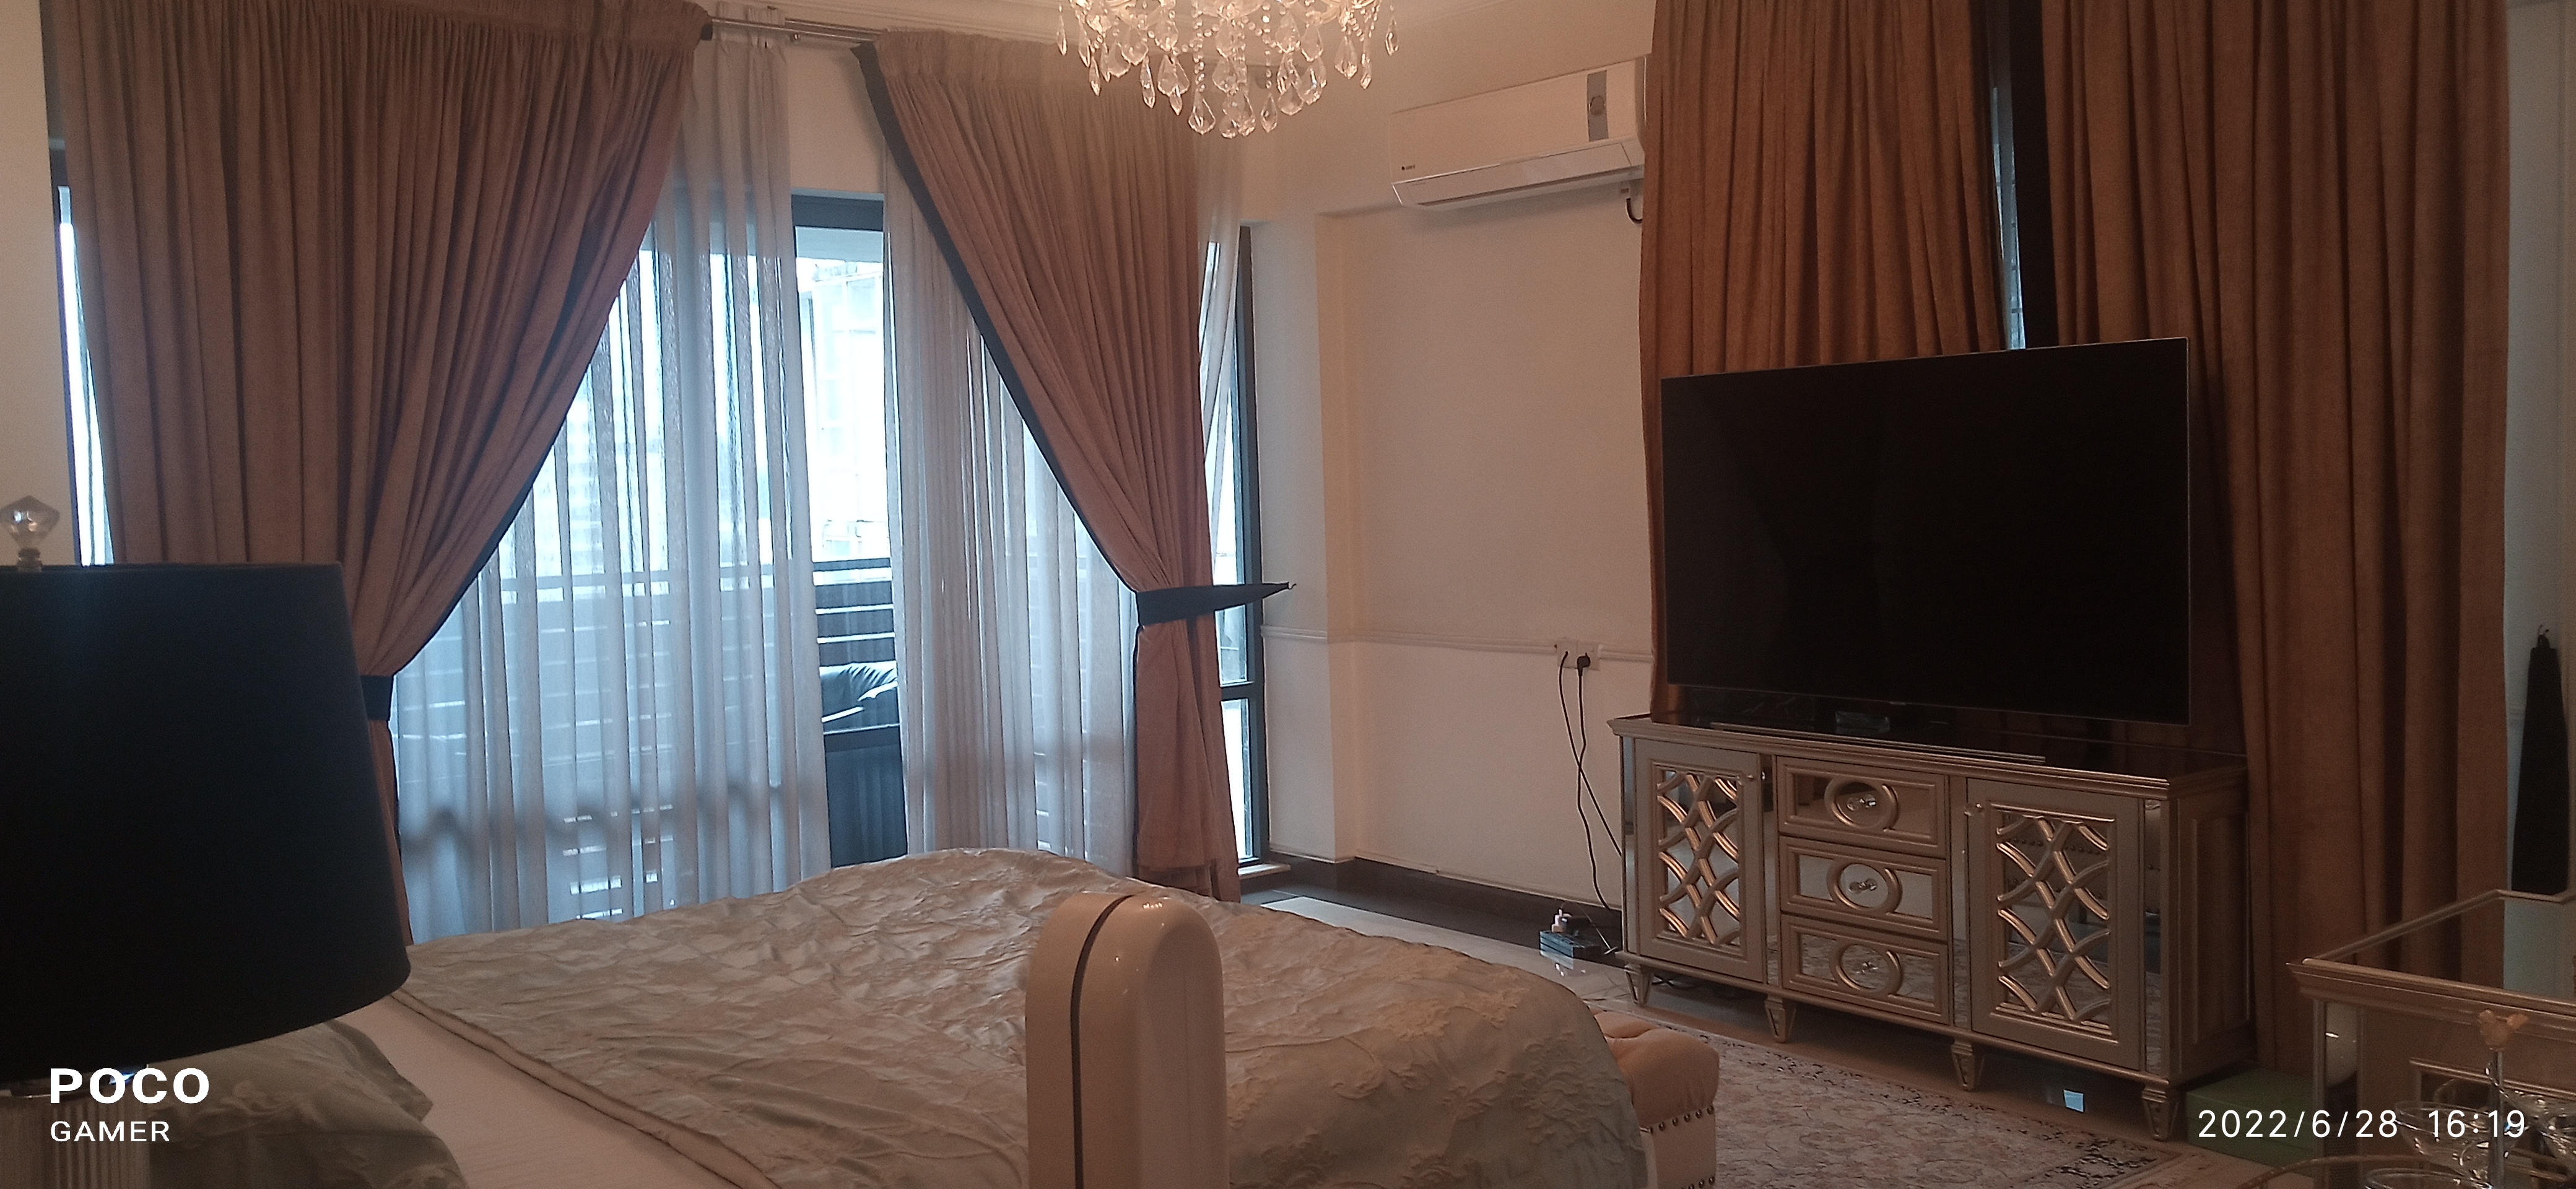 3400sft Luxurious  fully furnished Apt Gulshan2  North For Rent